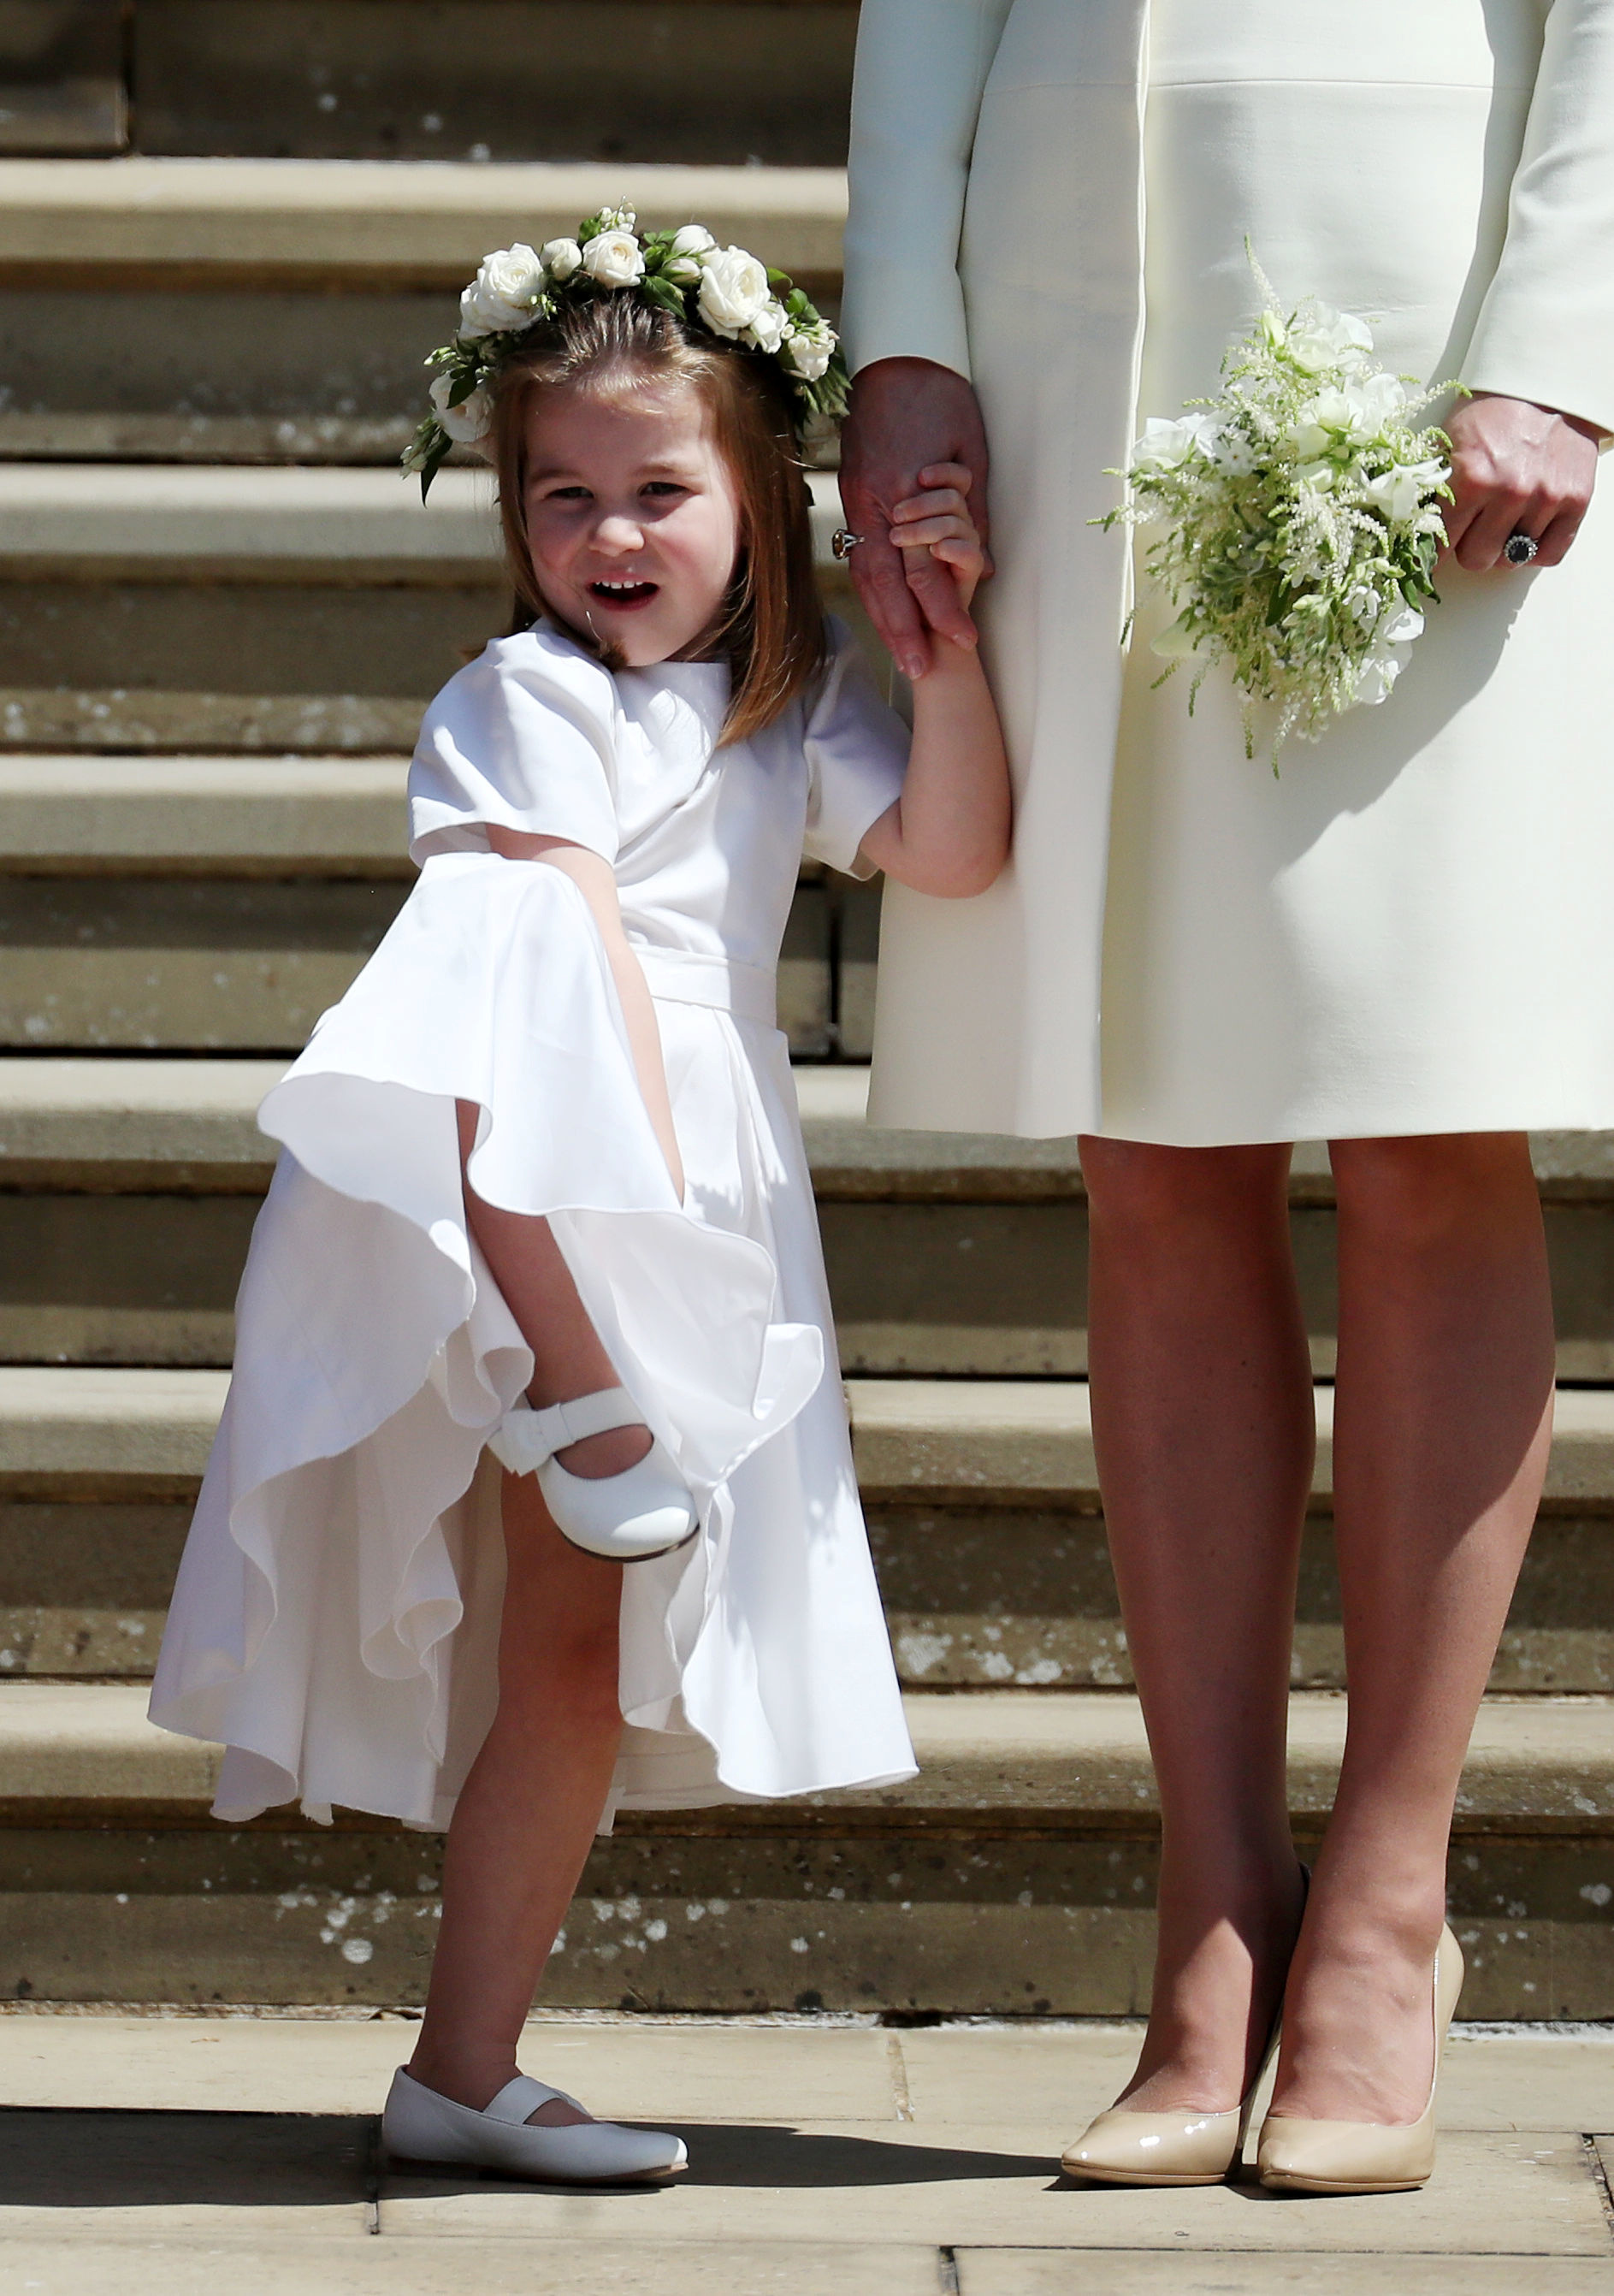 Princess Charlotte on the steps of St George's Chapel in Windsor Castle after the wedding of Prince Harry and Meghan Markle in Windsor, Britain, May 19, 2018. Jane Barlow/Pool via REUTERS - RC1305F00DB0